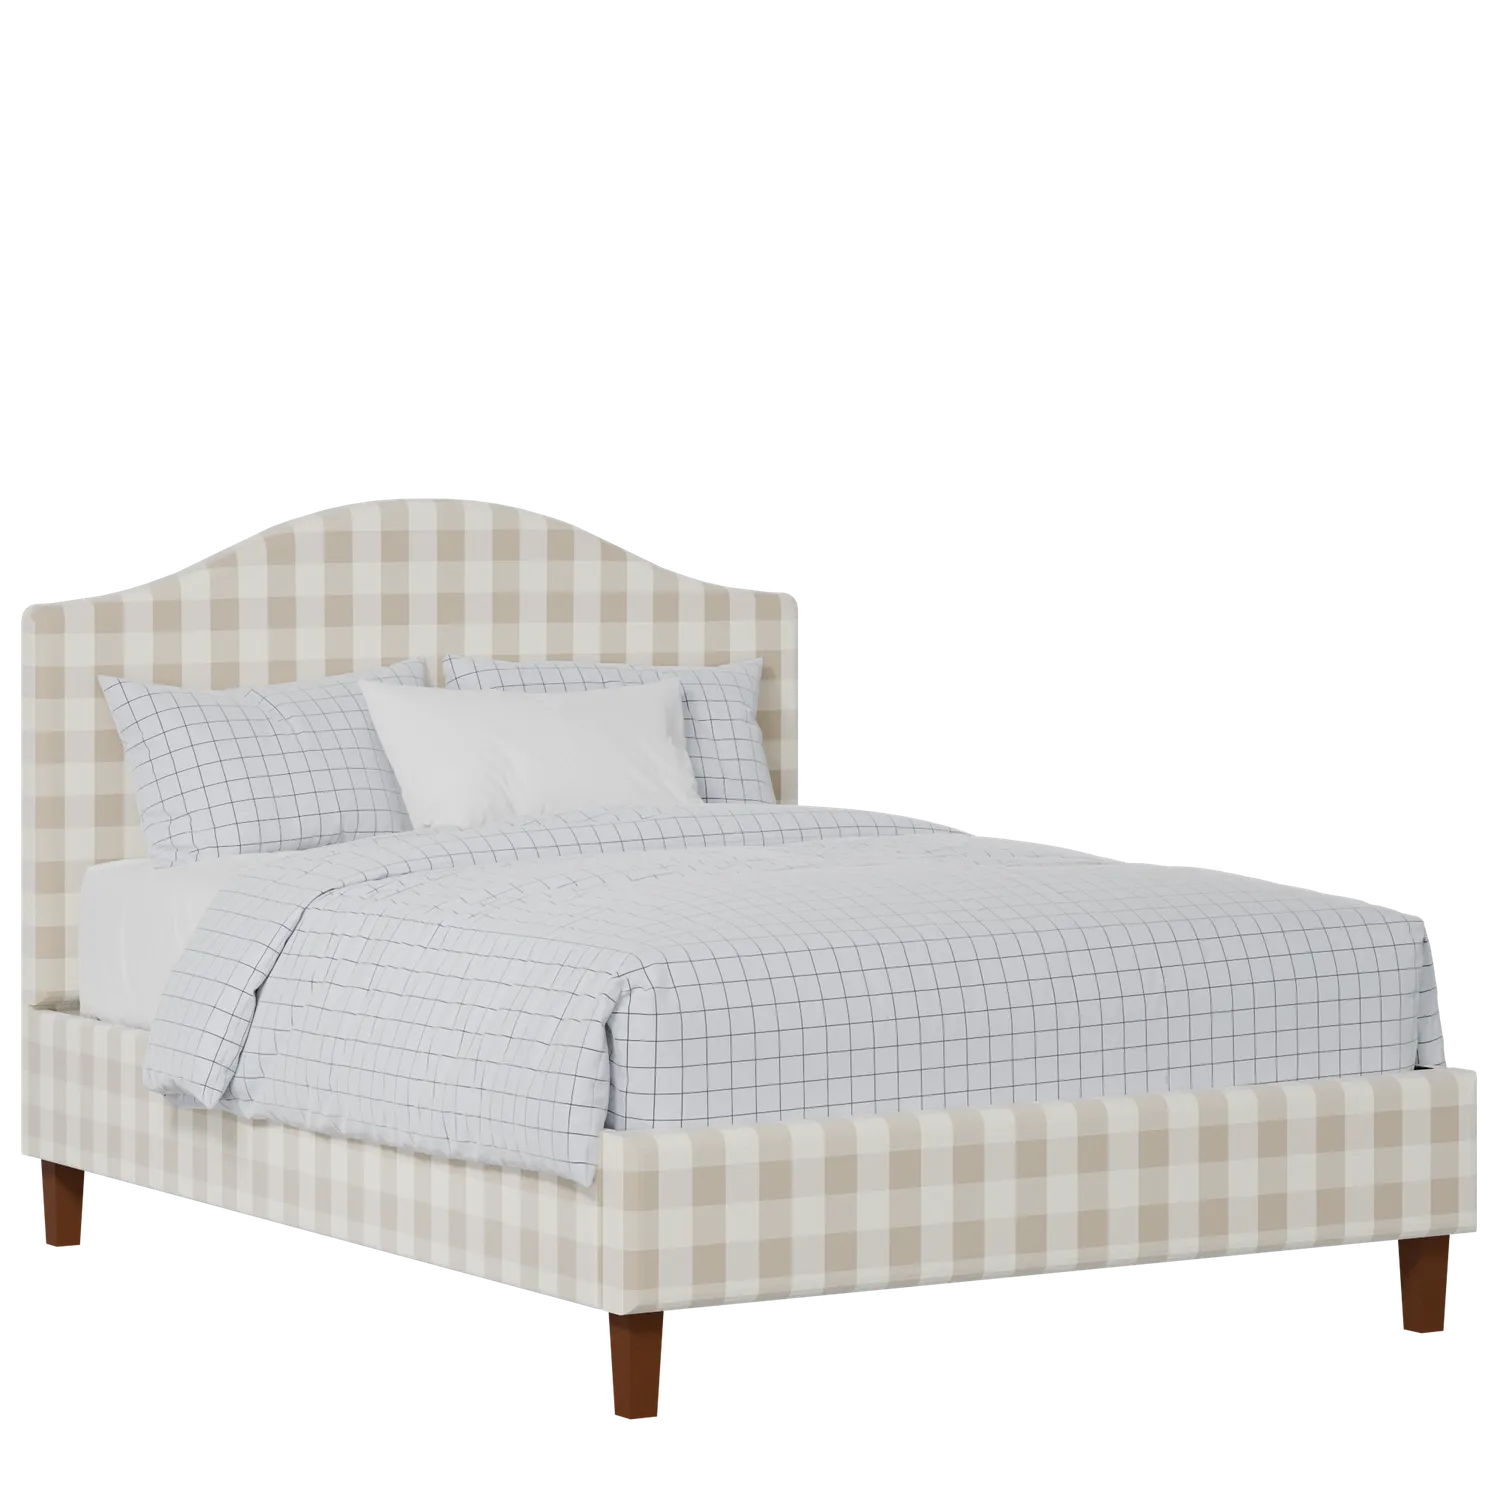 Burley Slim upholstered bed in Romo Kemble Putty fabric with Juno mattress